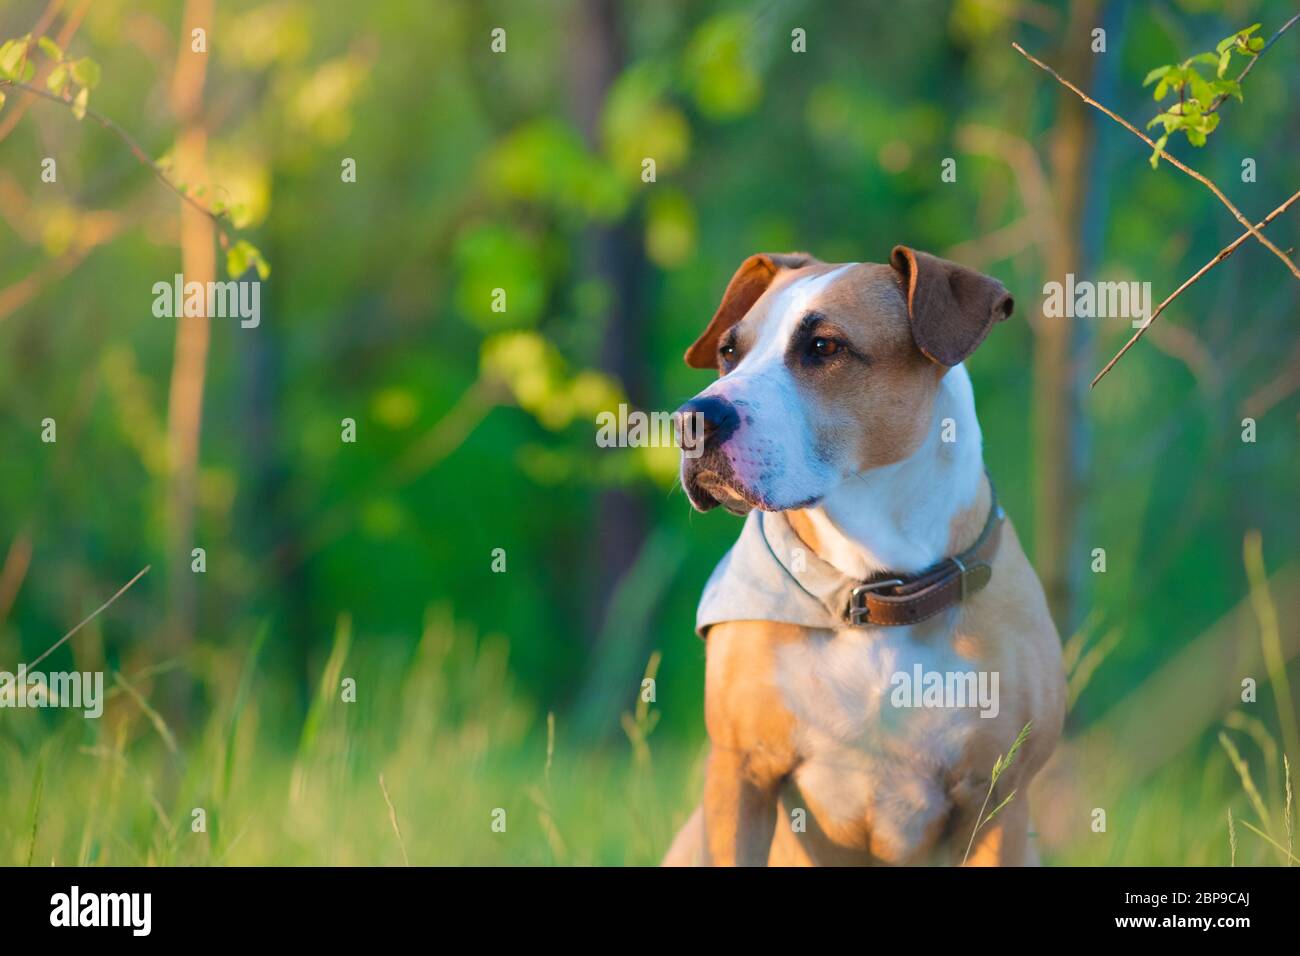 Telephoto portrait of a dog among fresh green grass and leaves. Beautiful pitbull terrier mutt in the forest, shallow depth of field Stock Photo